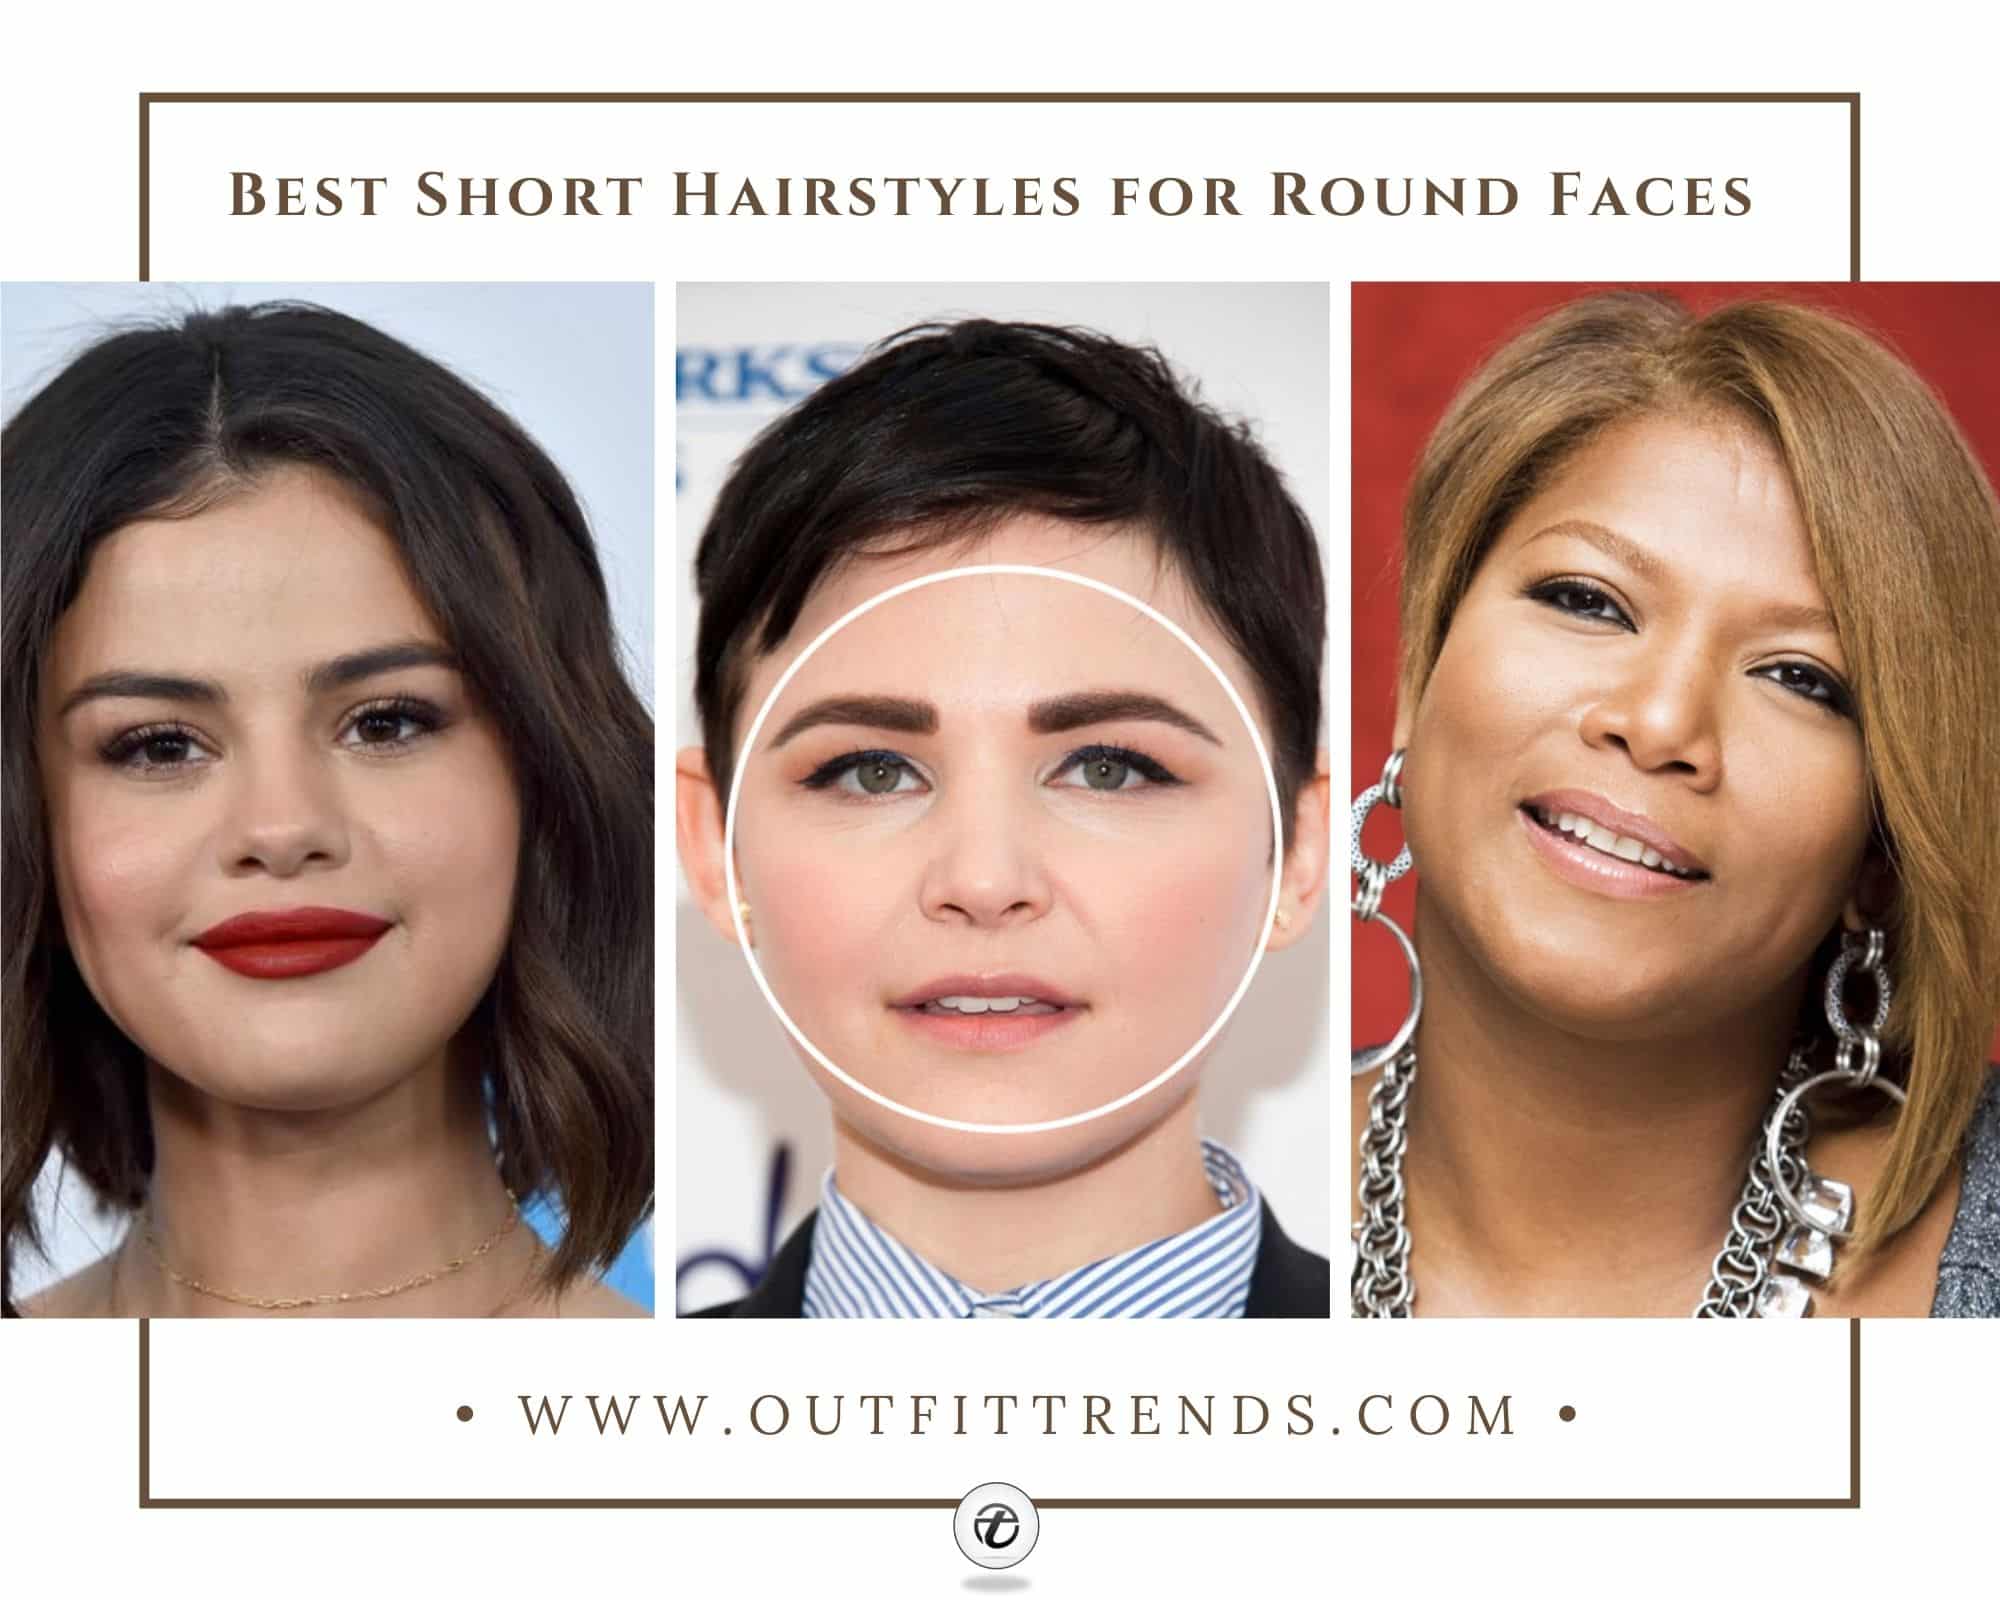 7 Simple Puff Hairstyles for Everyday That Women Can Rock